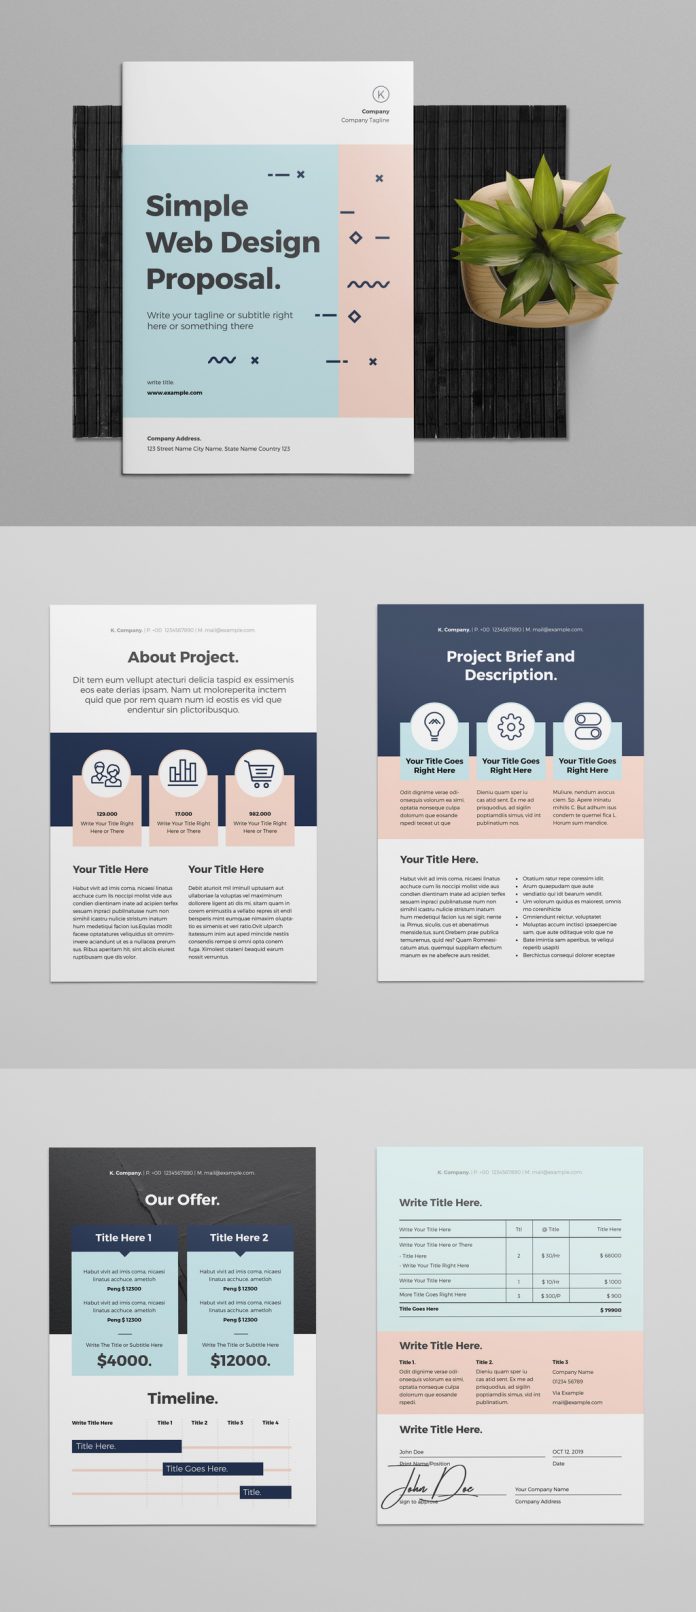 Blue and Pink Design Project Proposal Template for Adobe InDesign